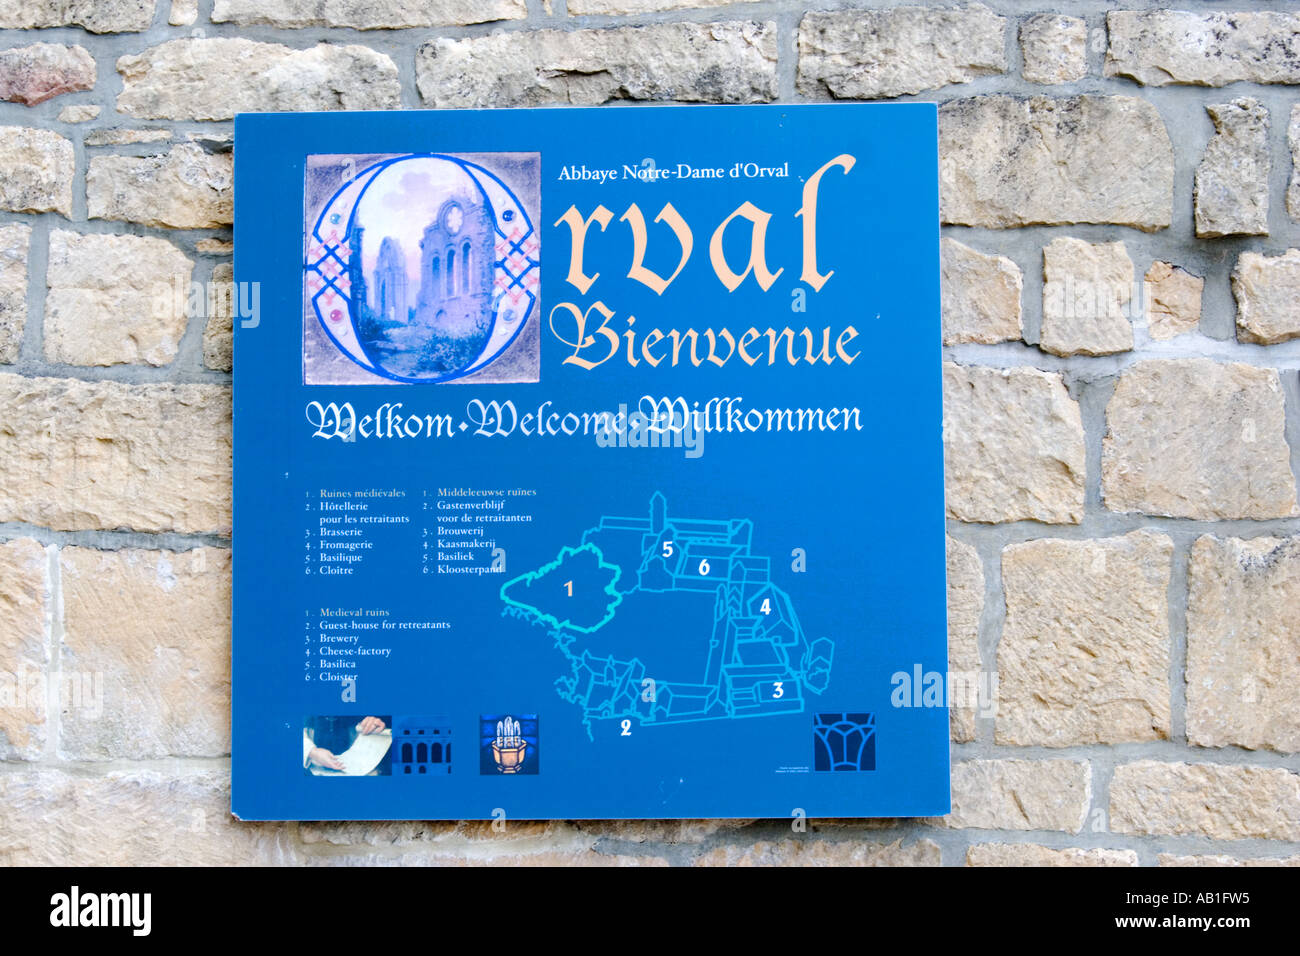 Entry sign at Abbaye d’Orval monastery Orval Belgium Stock Photo